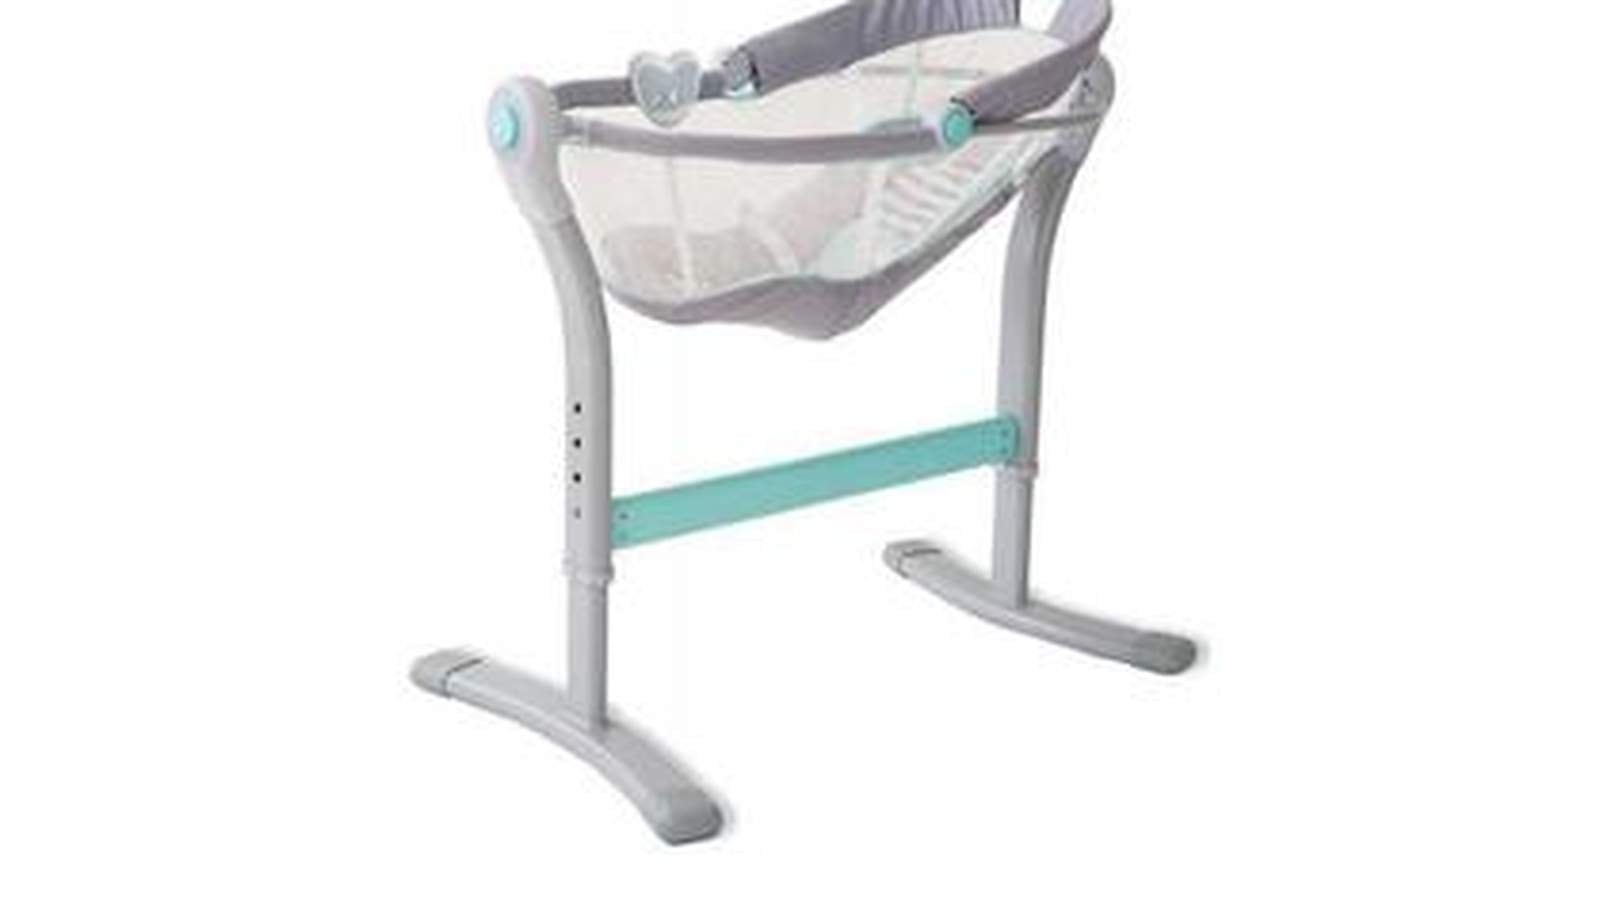 Do not use this infant sleeper, CPSC warns